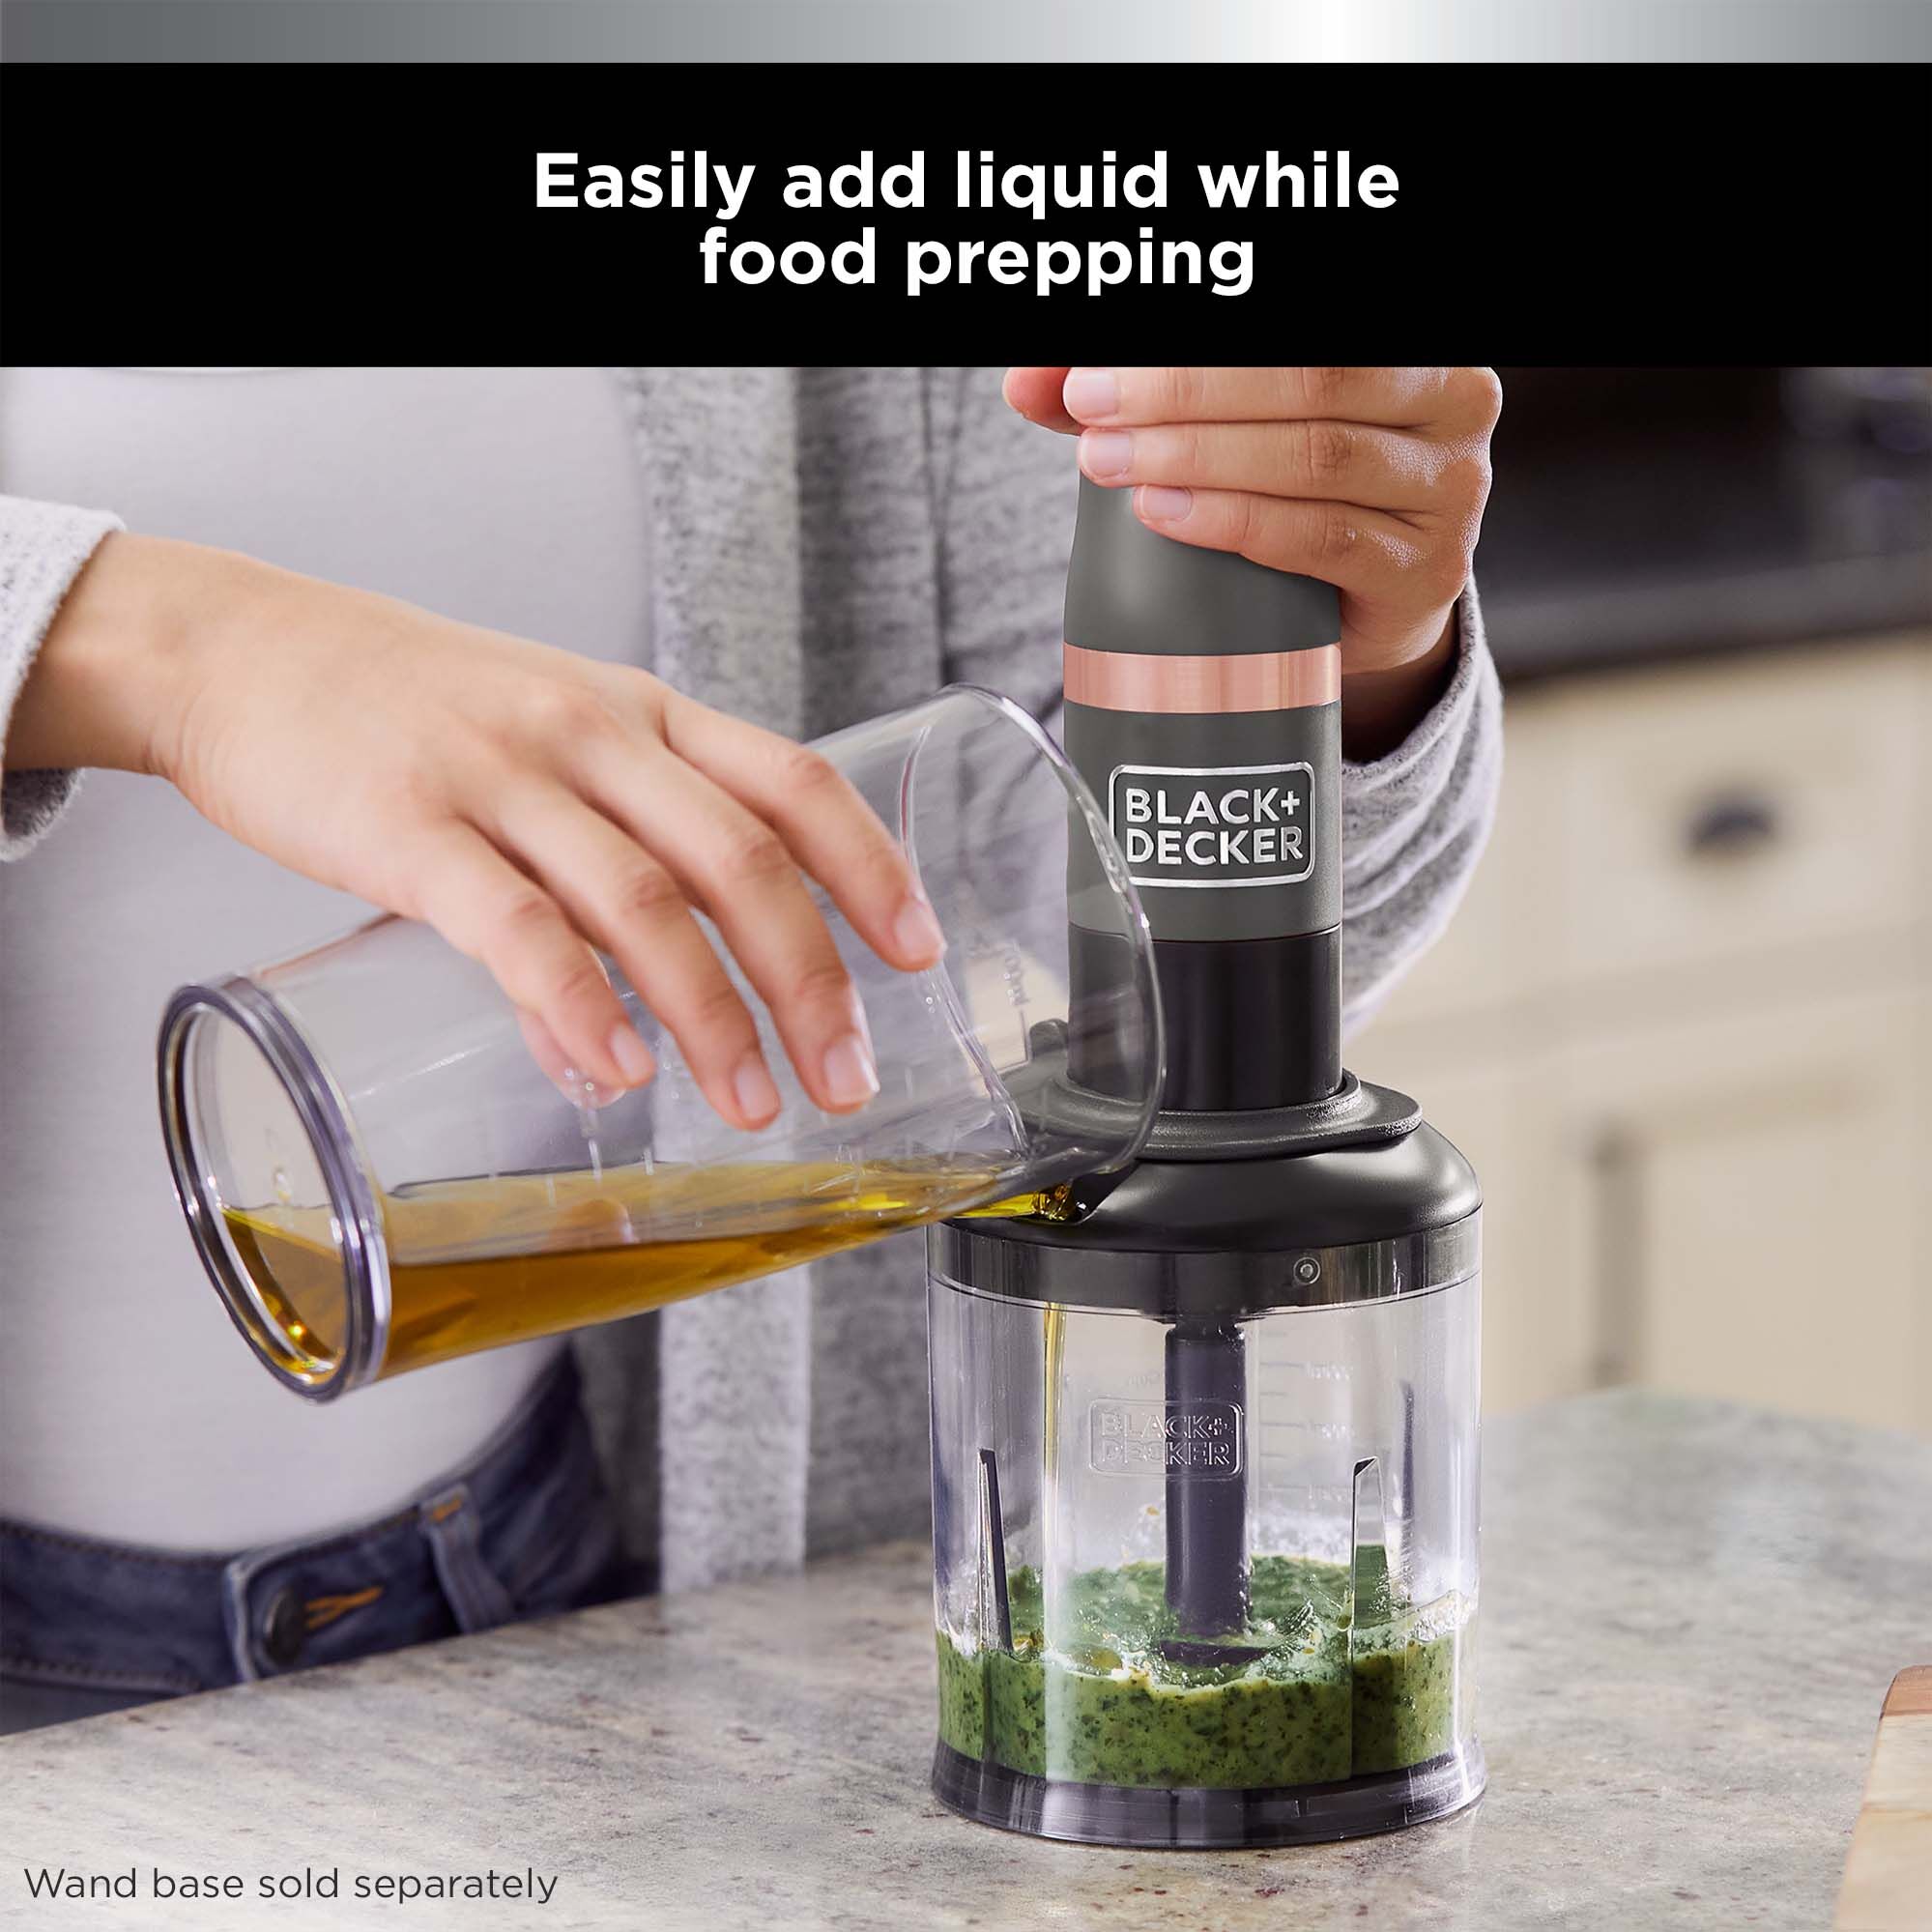 Talent using the liquid port to easily add liquid into the bowl while using the BLACK+DECKER kitchen wand™ food chopper attachment